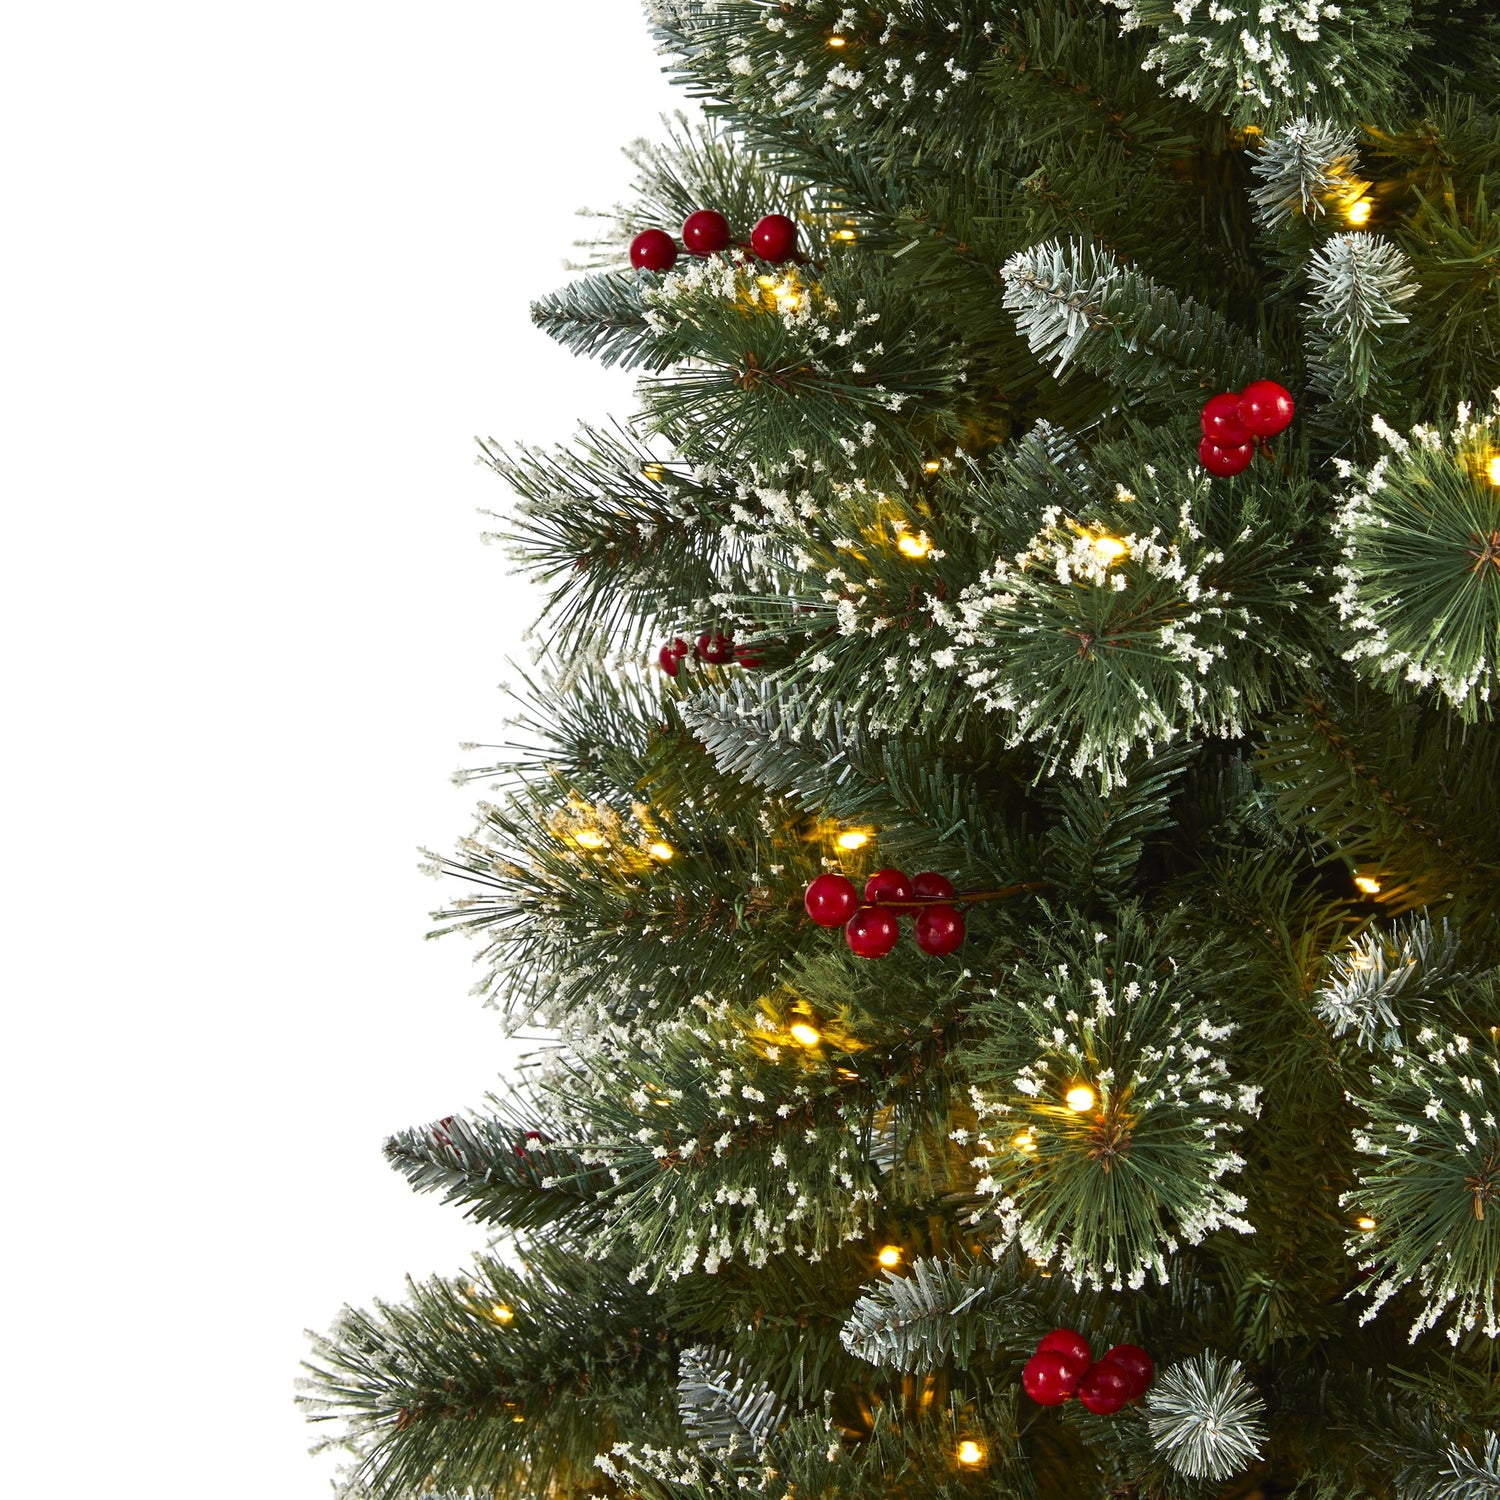 Nearly Natural 9 ft. Frosted Tip Pine Artificial Christmas Tree